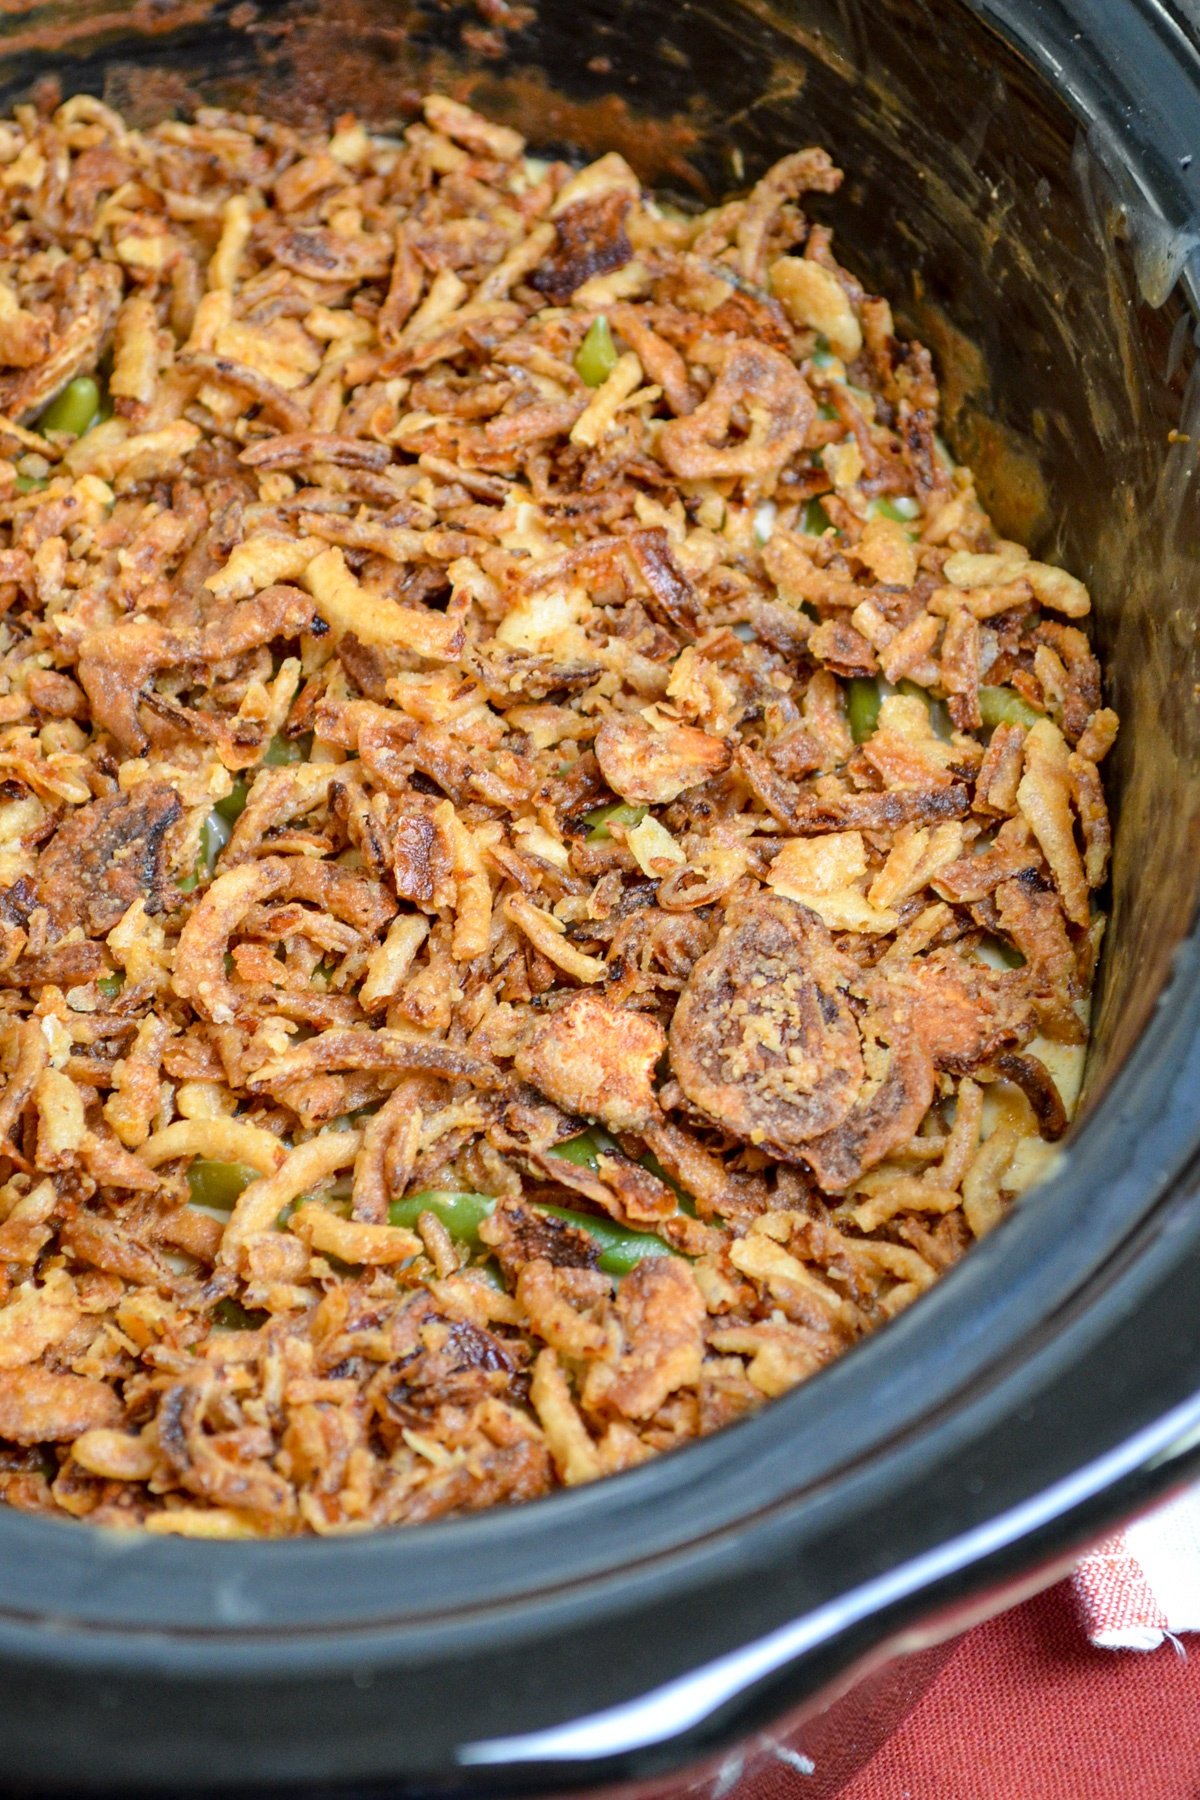 A slow cooker full of green bean casserole, topped with french fried onions.